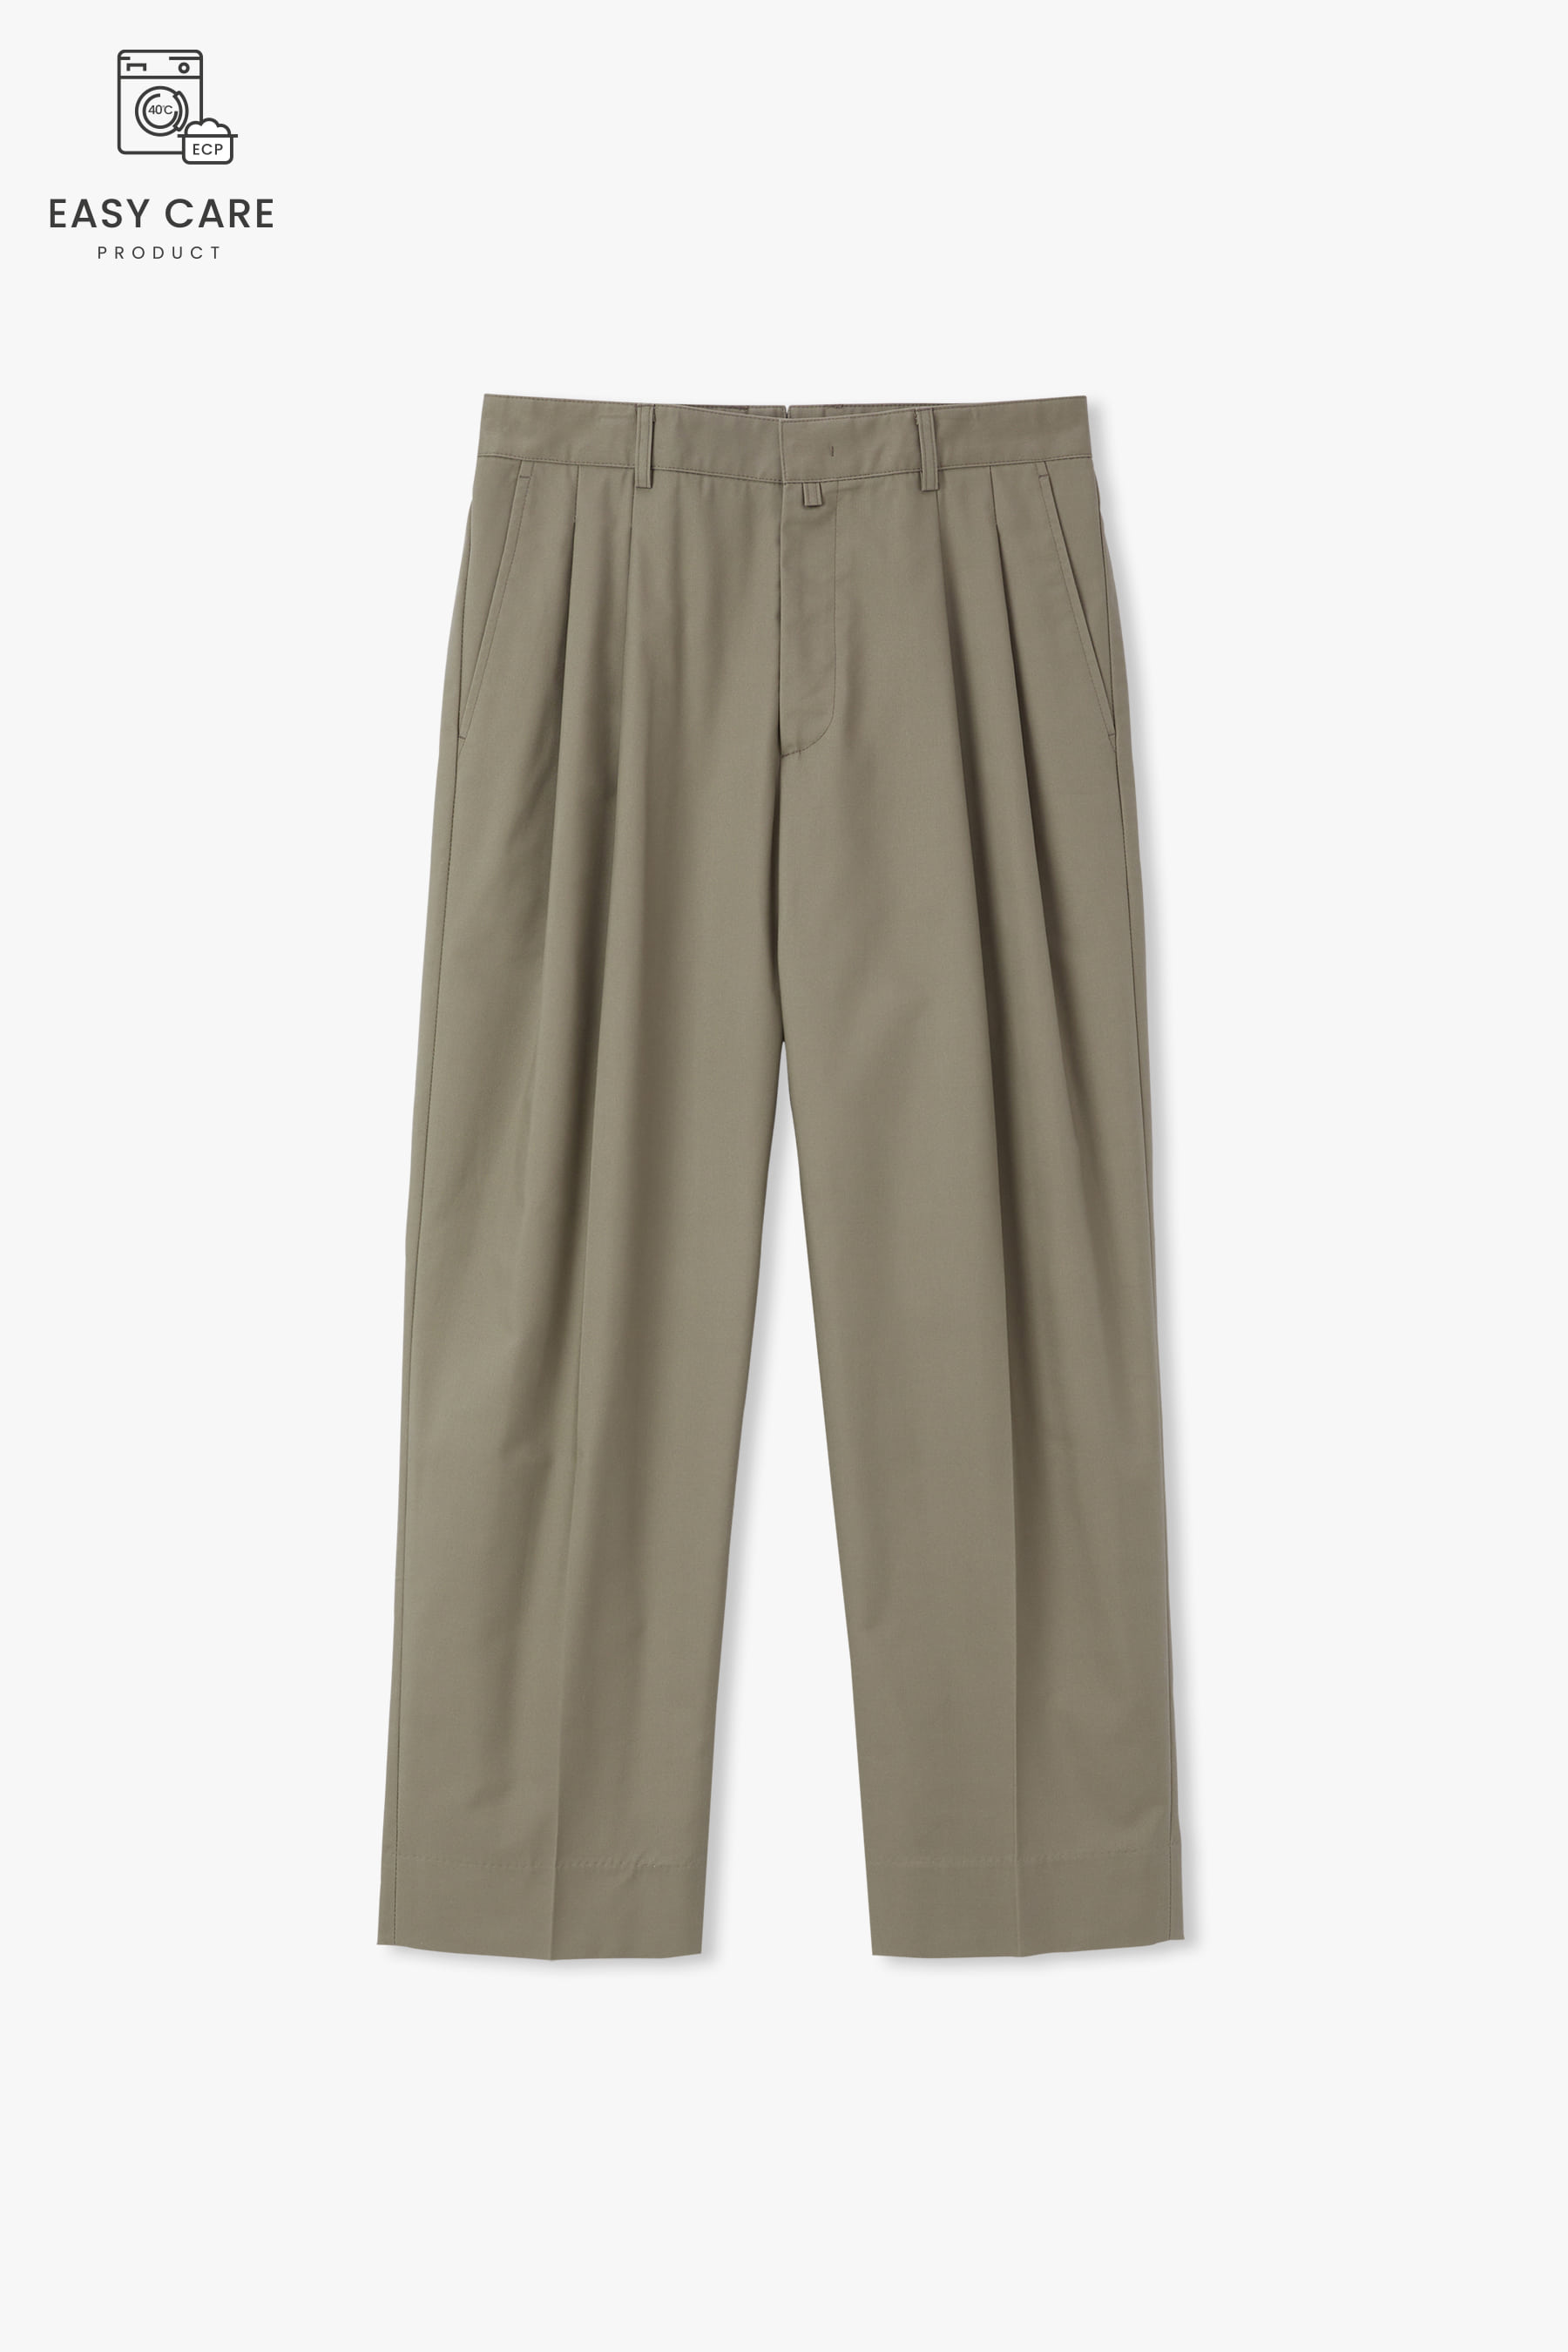 HAZEL WOOD R-802 TWO TUCK TAPERED COTTON DRILL CHINO PANTS (ECP GARMENT PROCESS ONLY MACHINE)